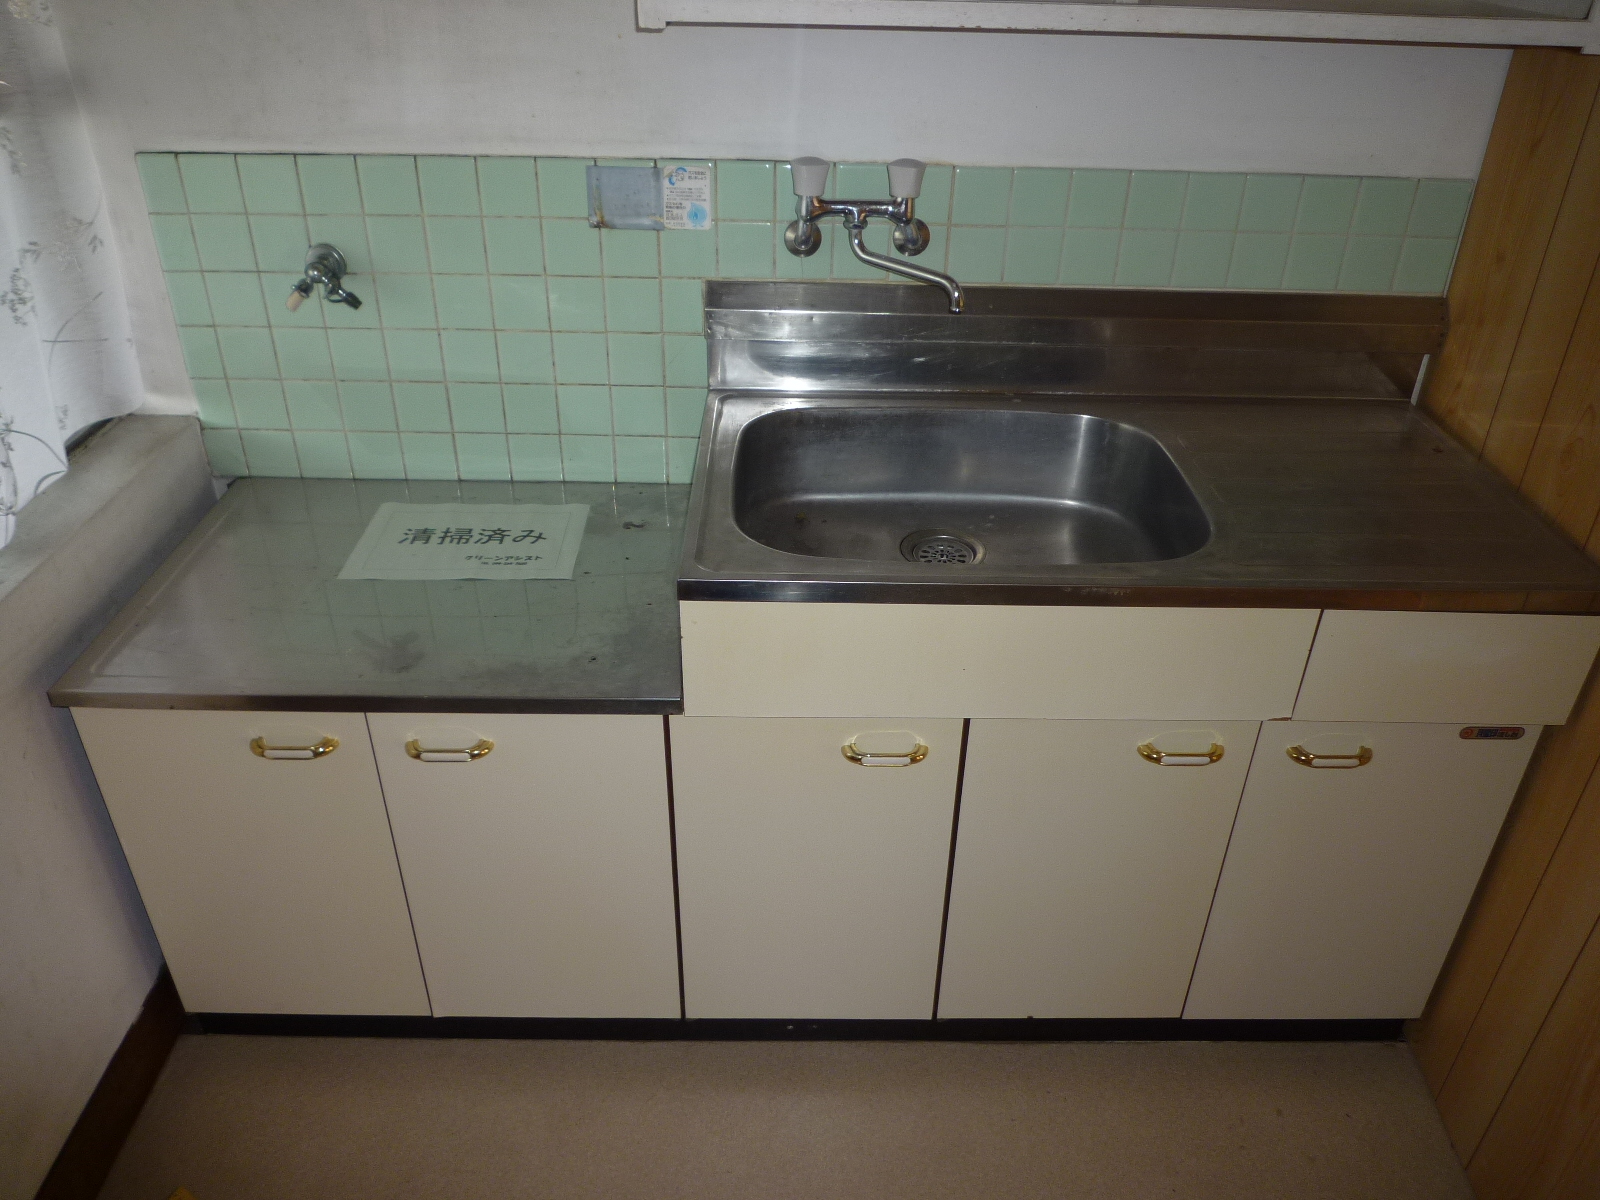 Kitchen. I will want to make dishes because the sink of spread